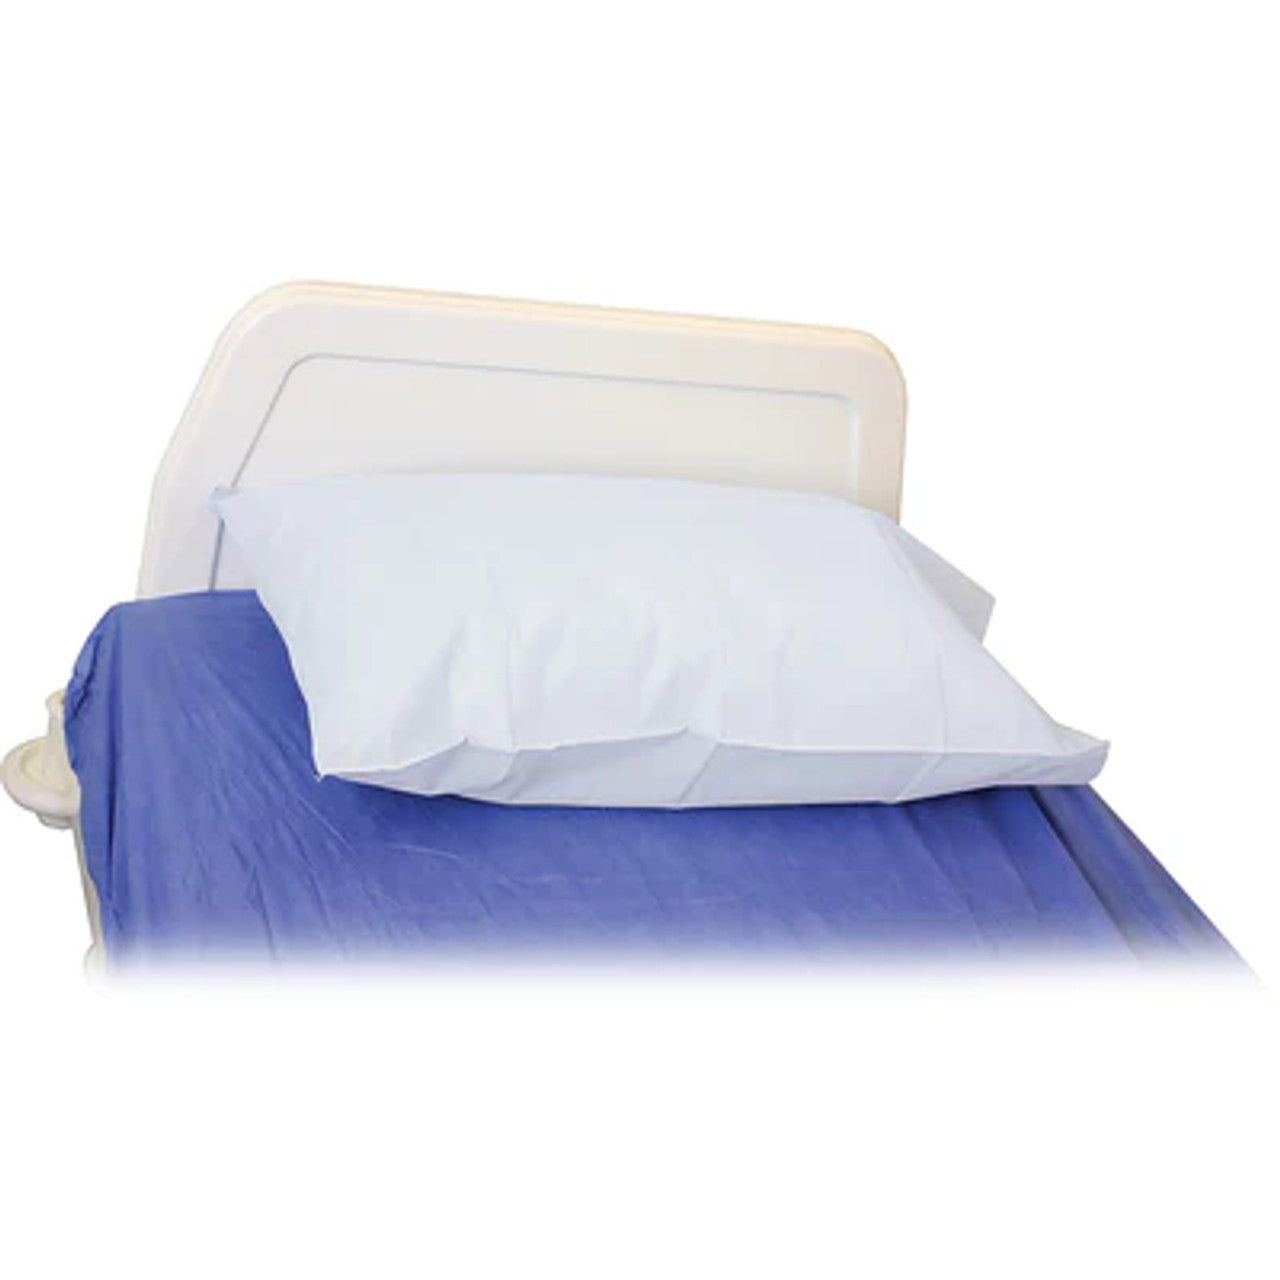 Haines® Disposable Hospital Pillow Cases- No Flap (Box of 200)